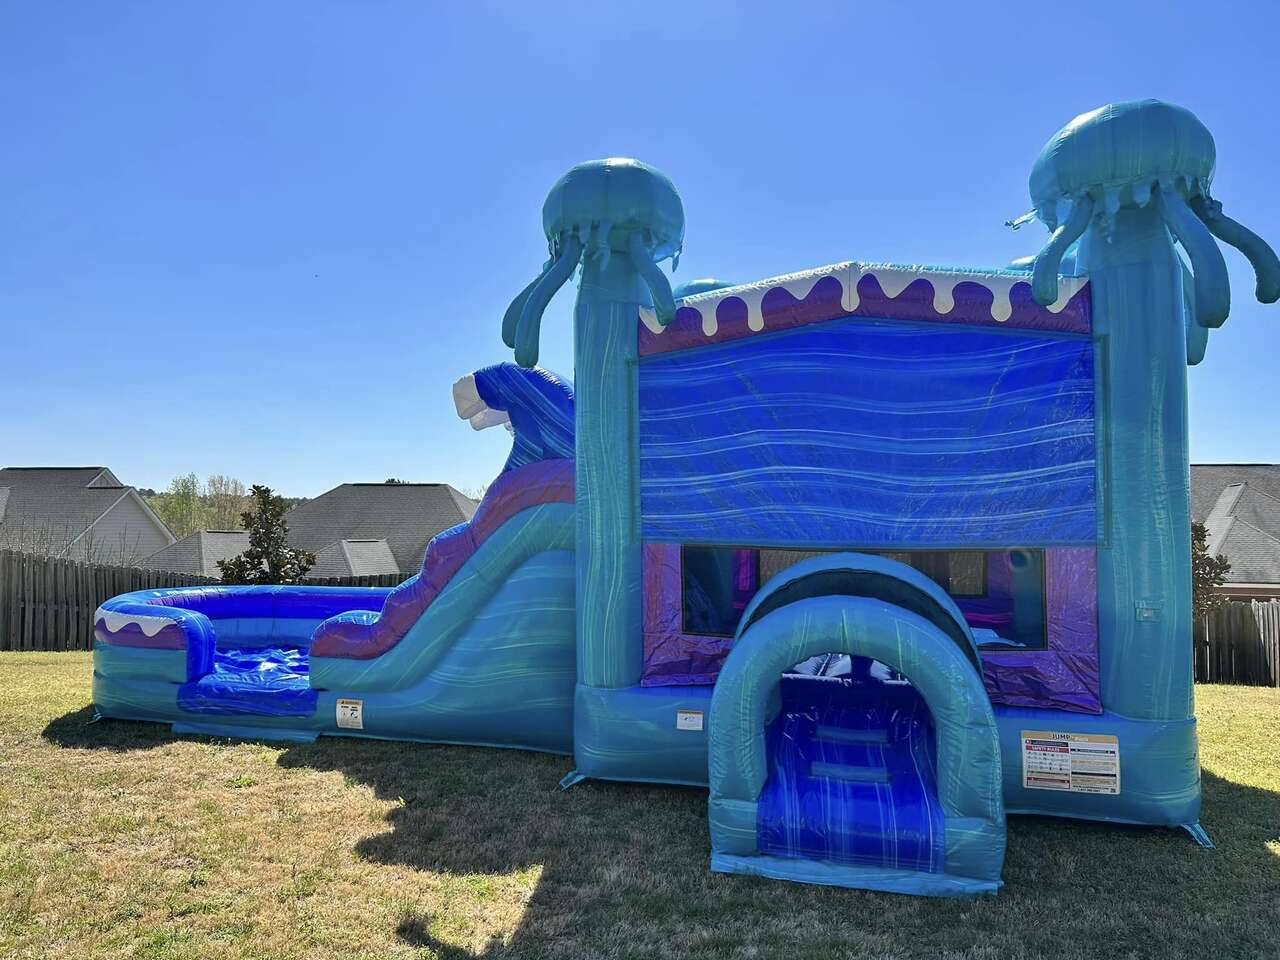 bounce house rentals Augusta